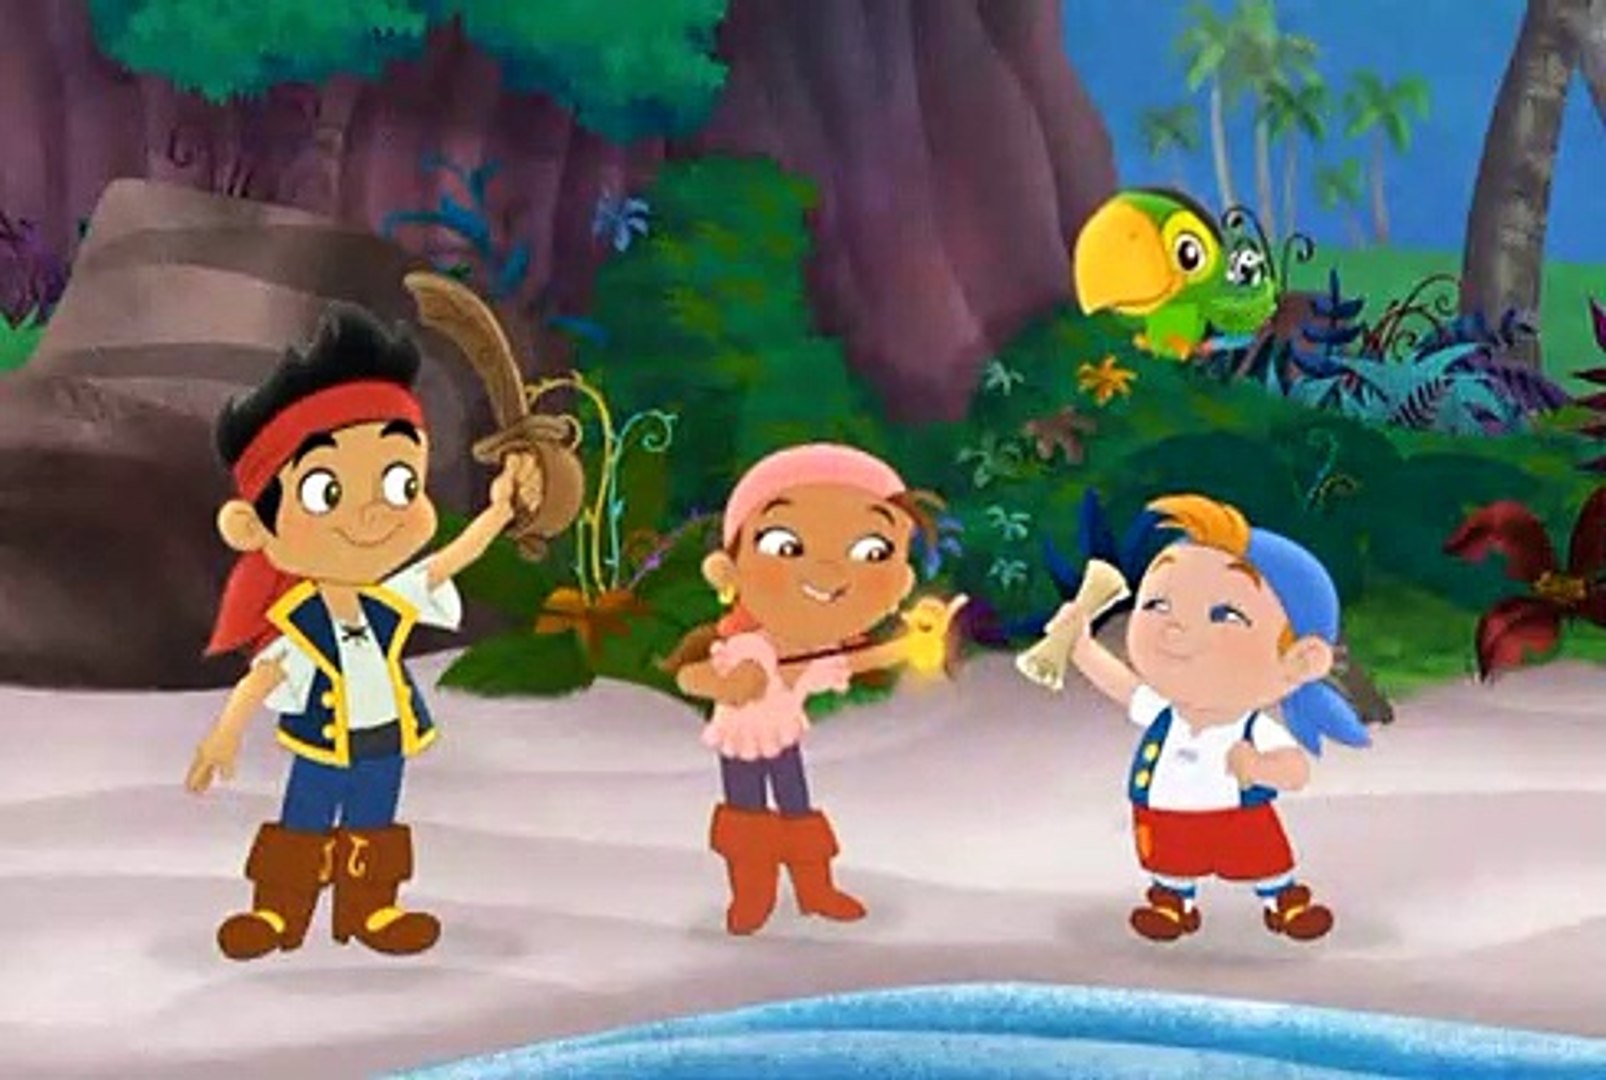 Jake and the Land Pirates S02E10 The Mermaid's Song-Treasure of the Tides - video Dailymotion